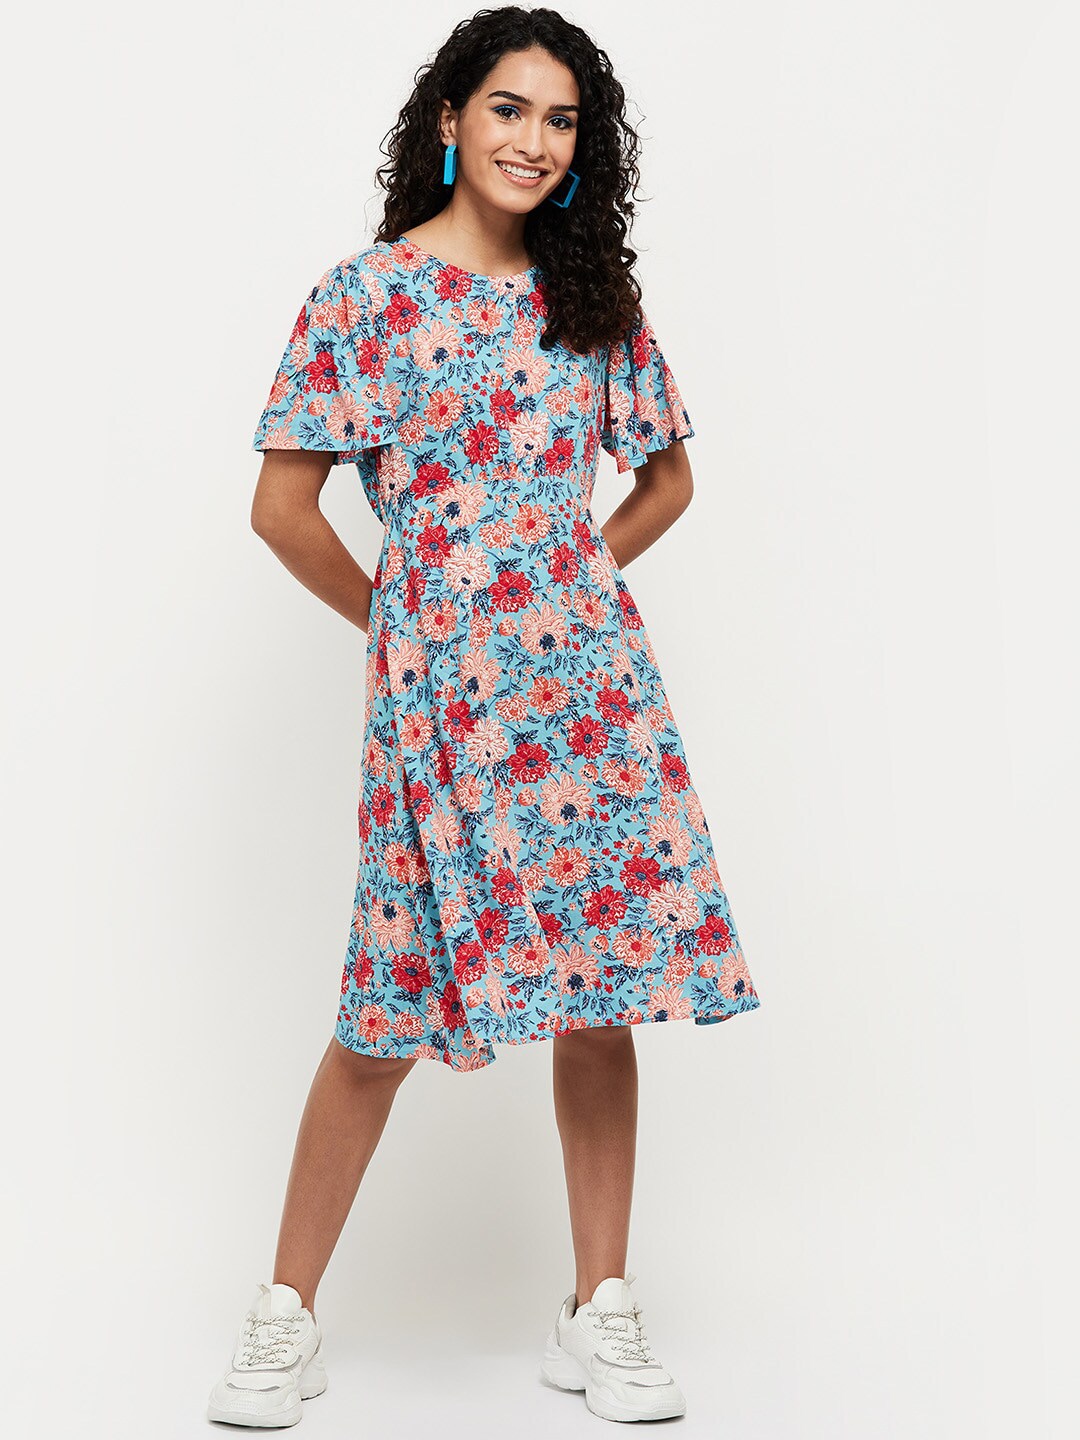 max Blue Floral Dress Price in India